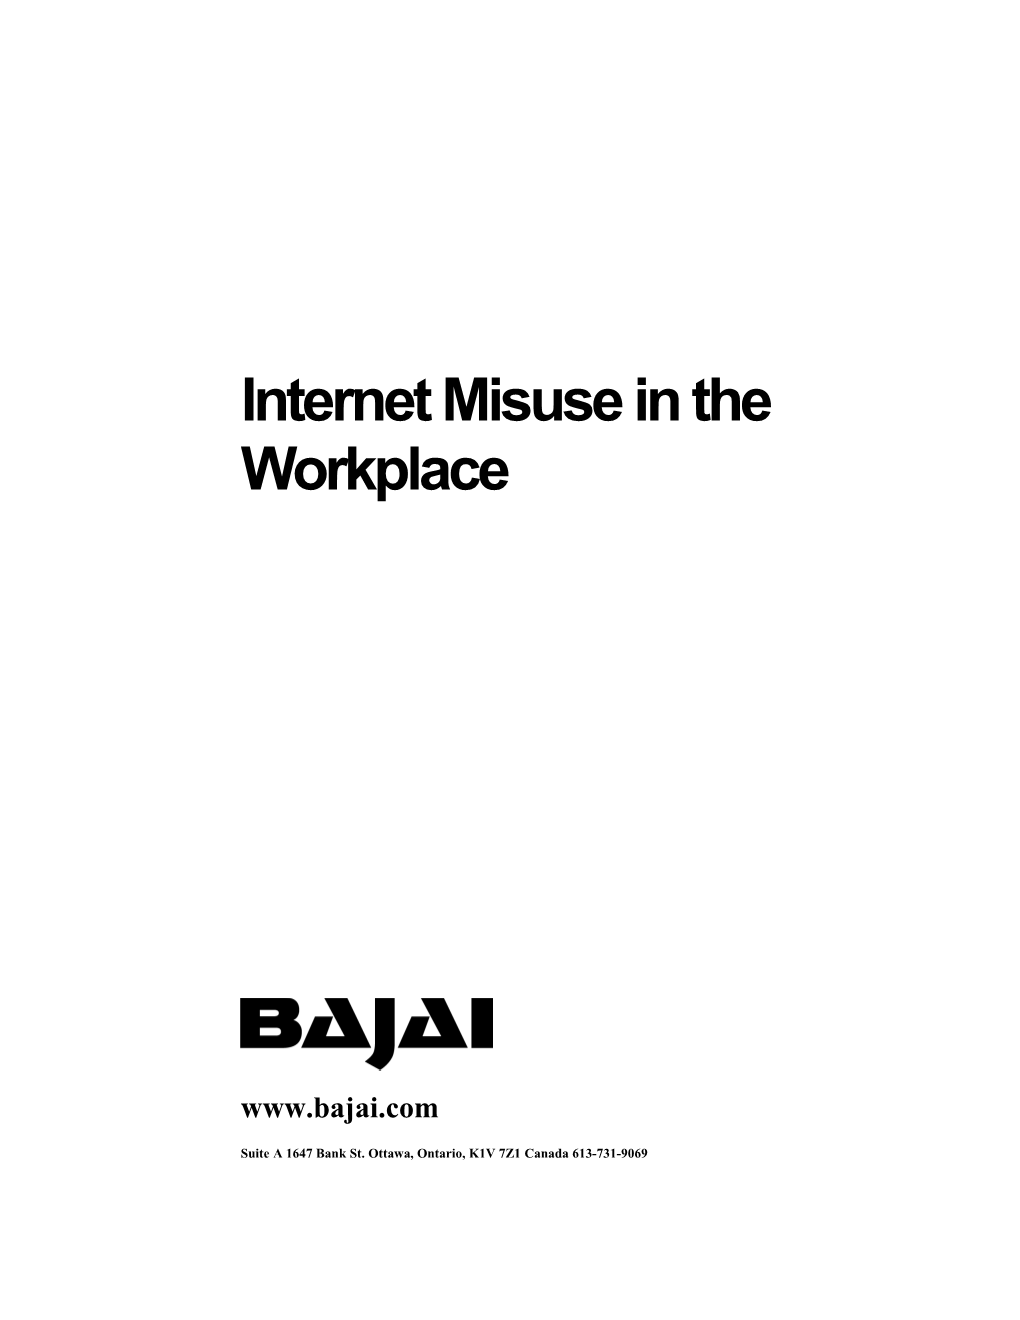 Internet Misuse in the Workplace